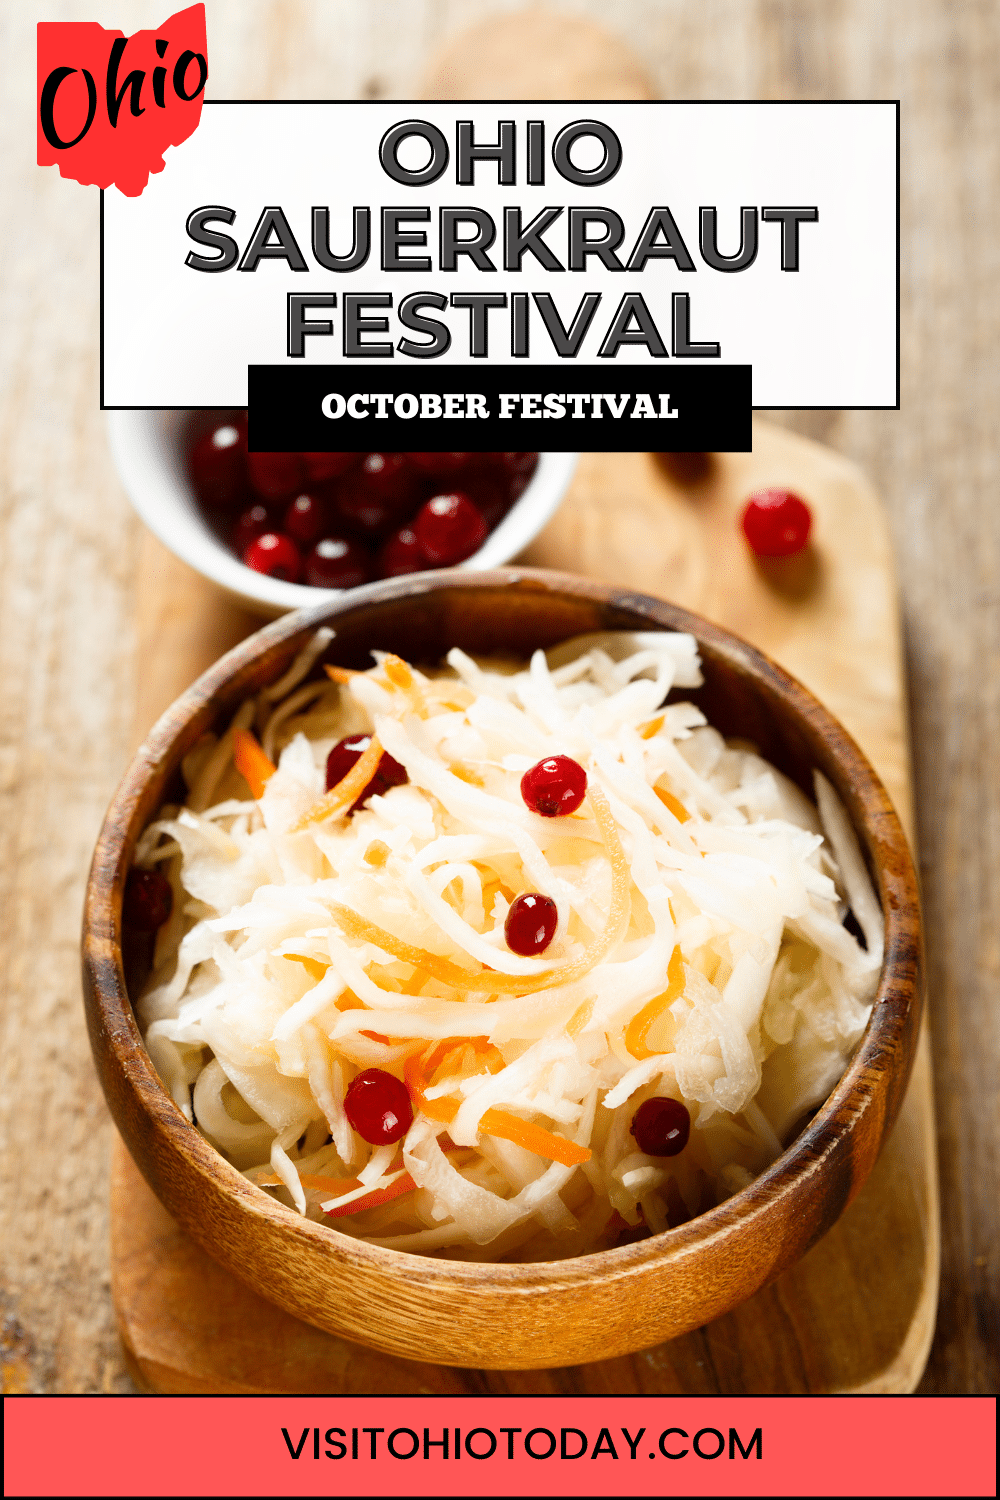 This festival is held in Waynesville on the weekend of 14 and 15 October 2023. Two days of shopping and sauerkraut indulgence!